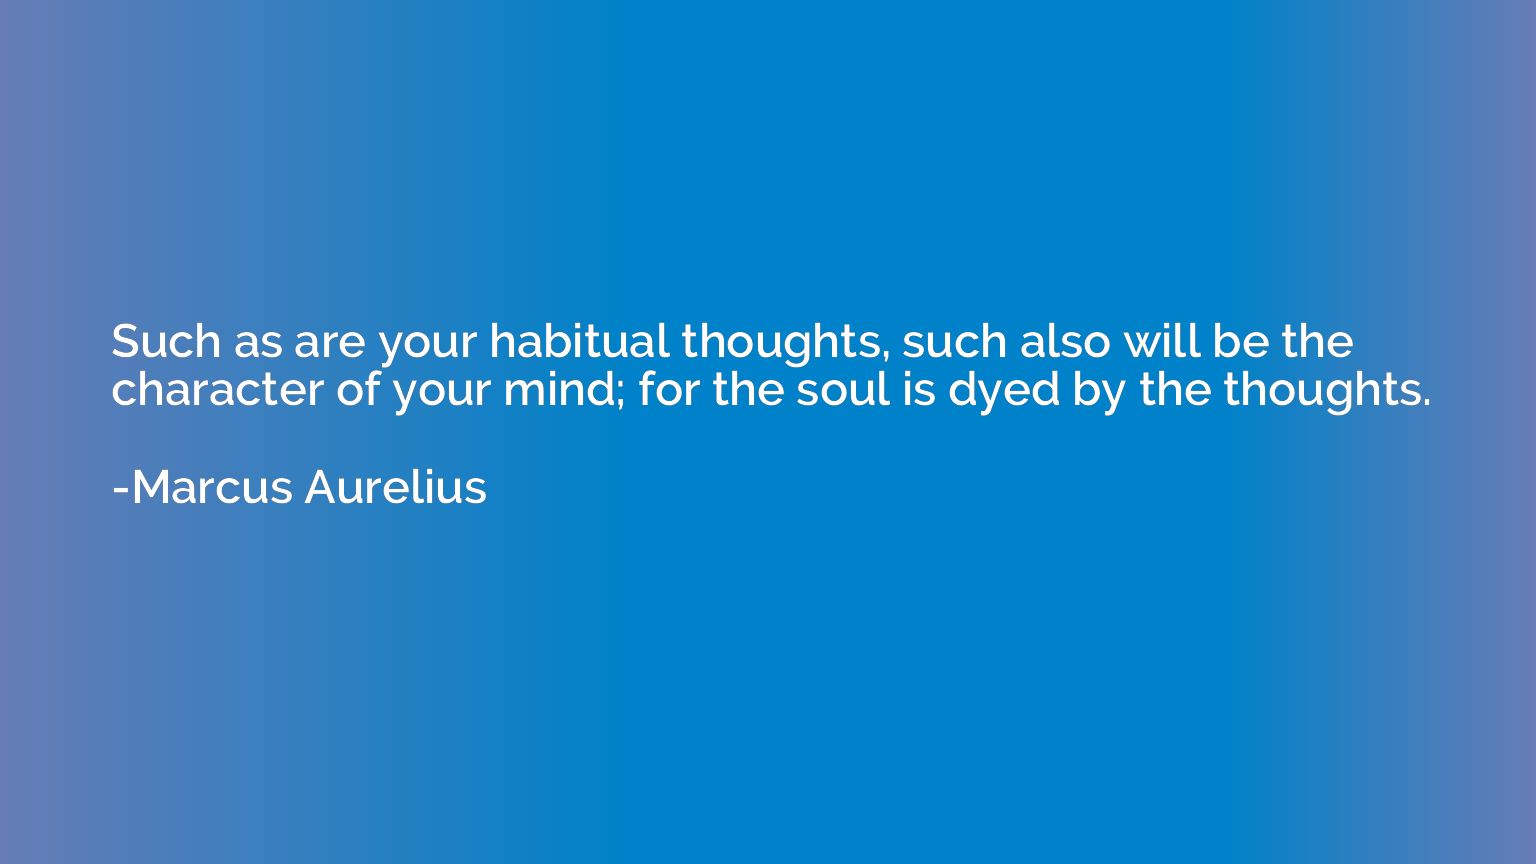 Such as are your habitual thoughts, such also will be the ch